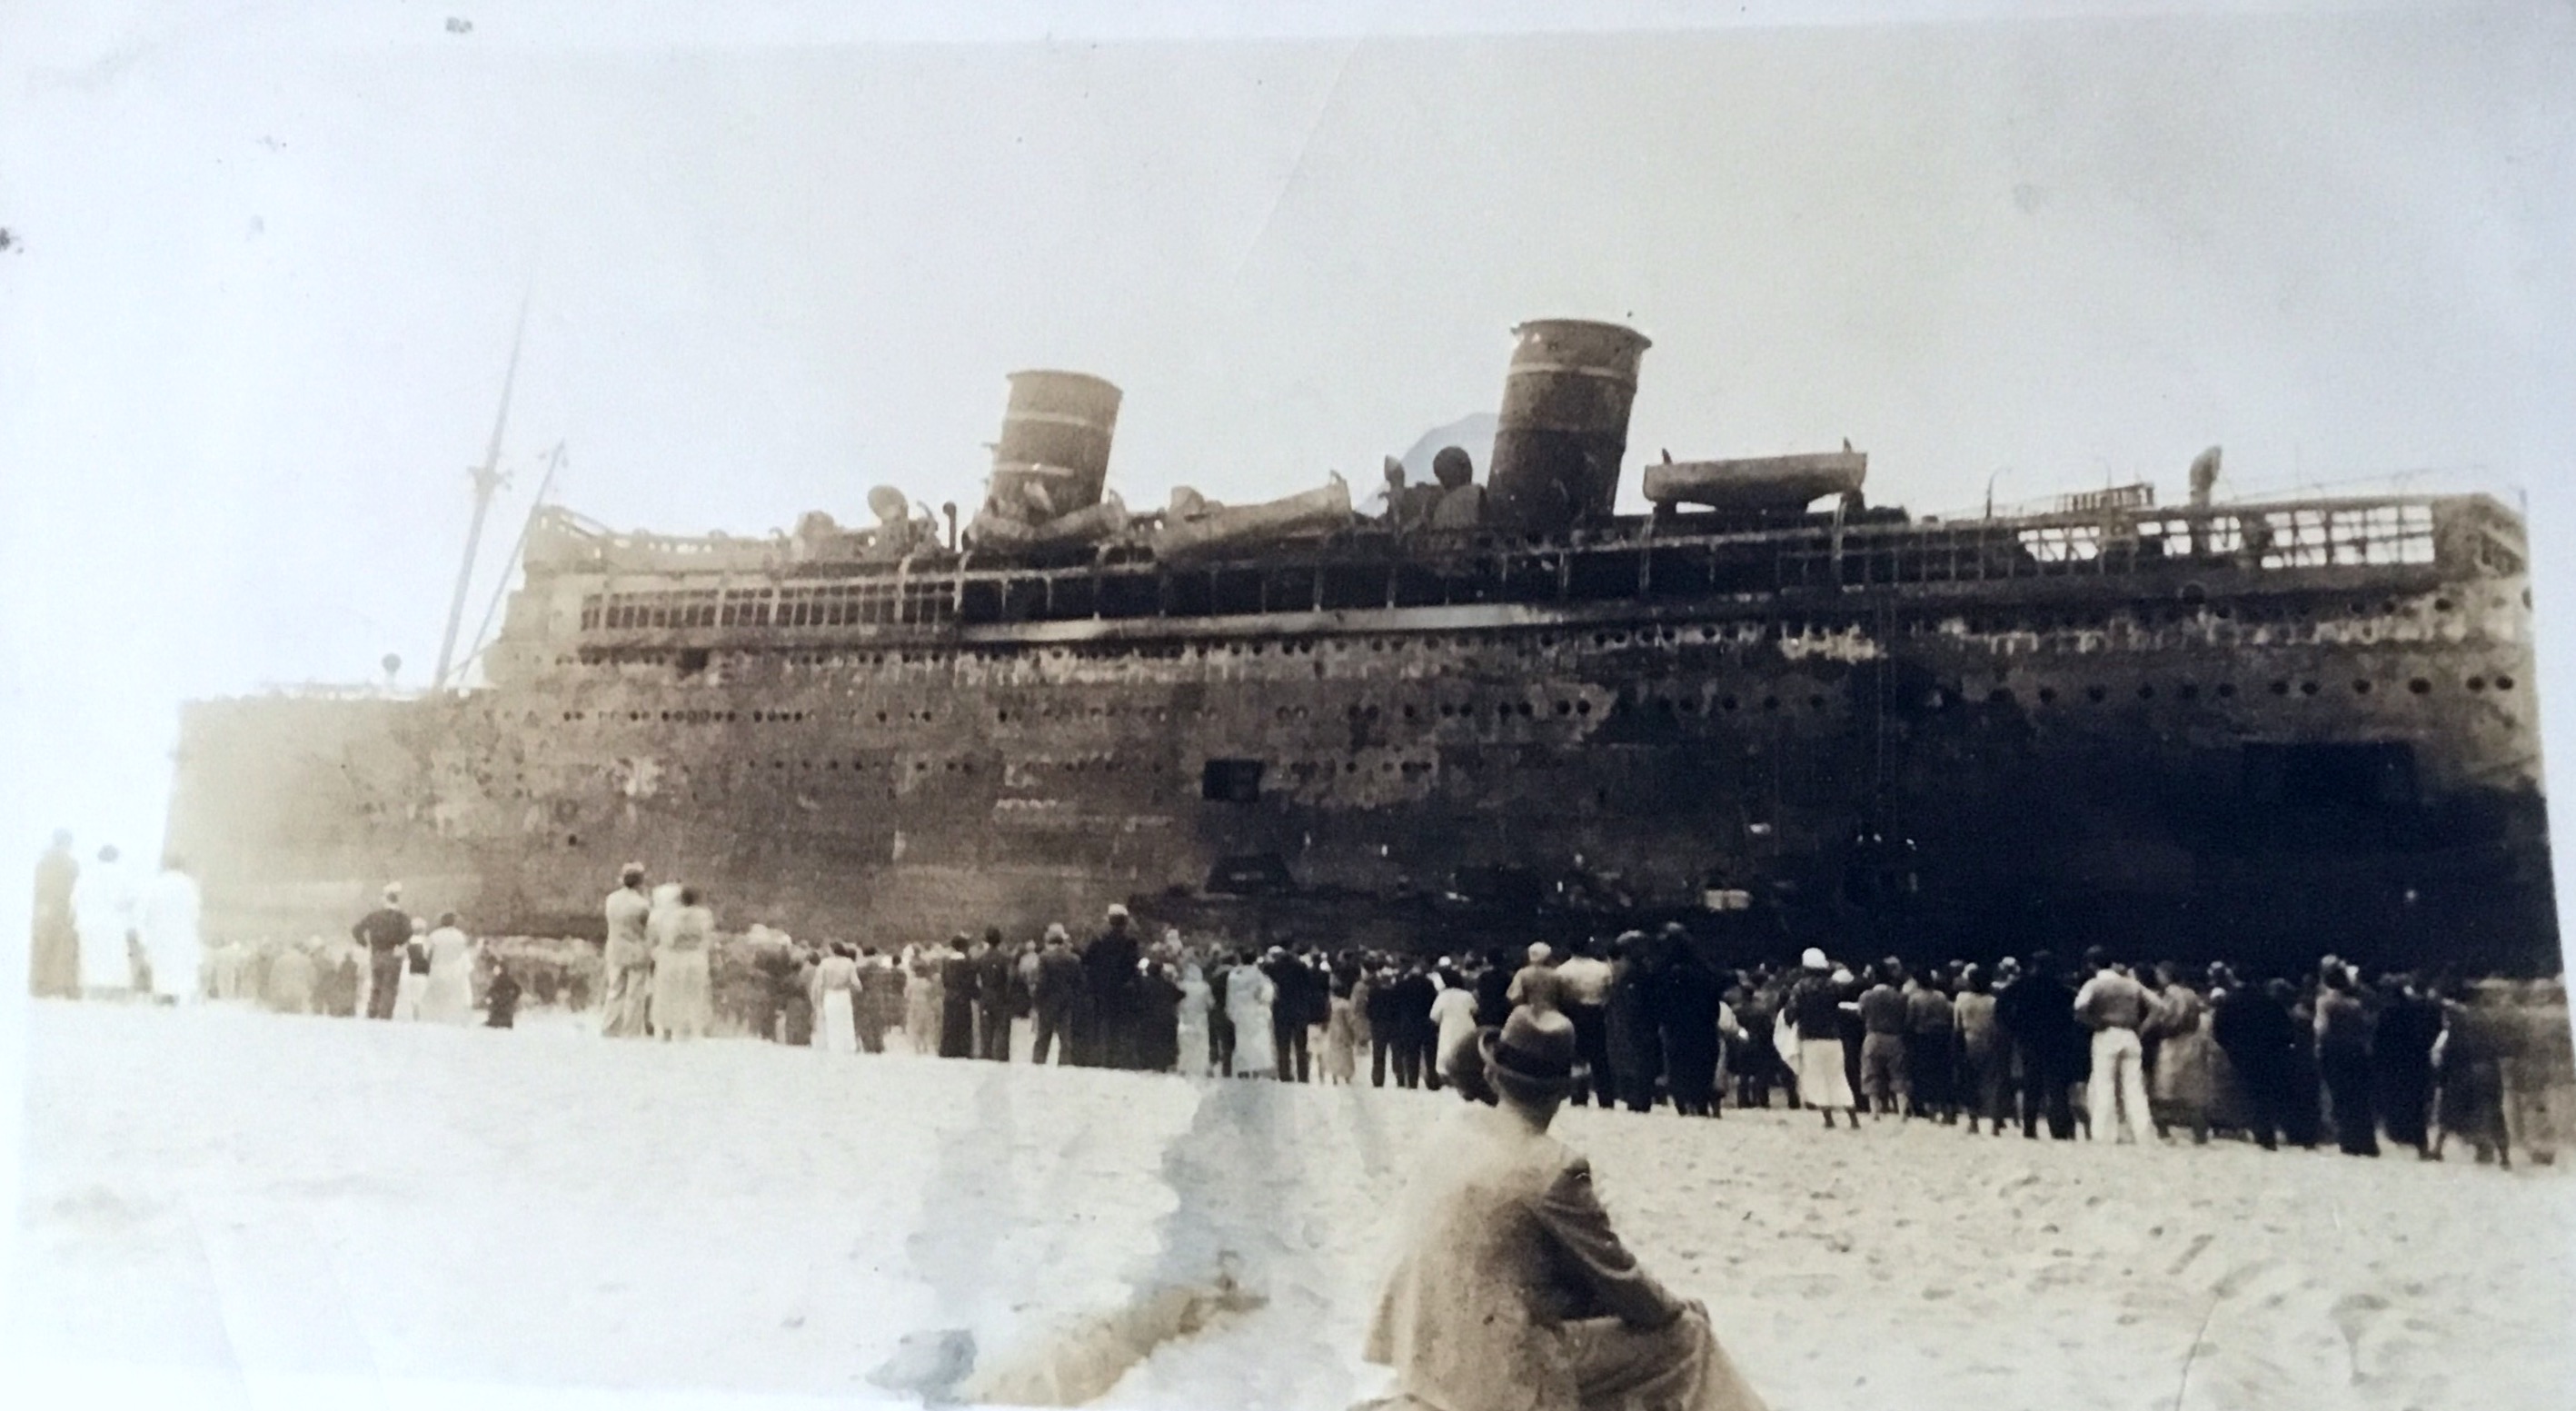 Wreck of the Moro Castle September 1934
Asbury Park New Jersey